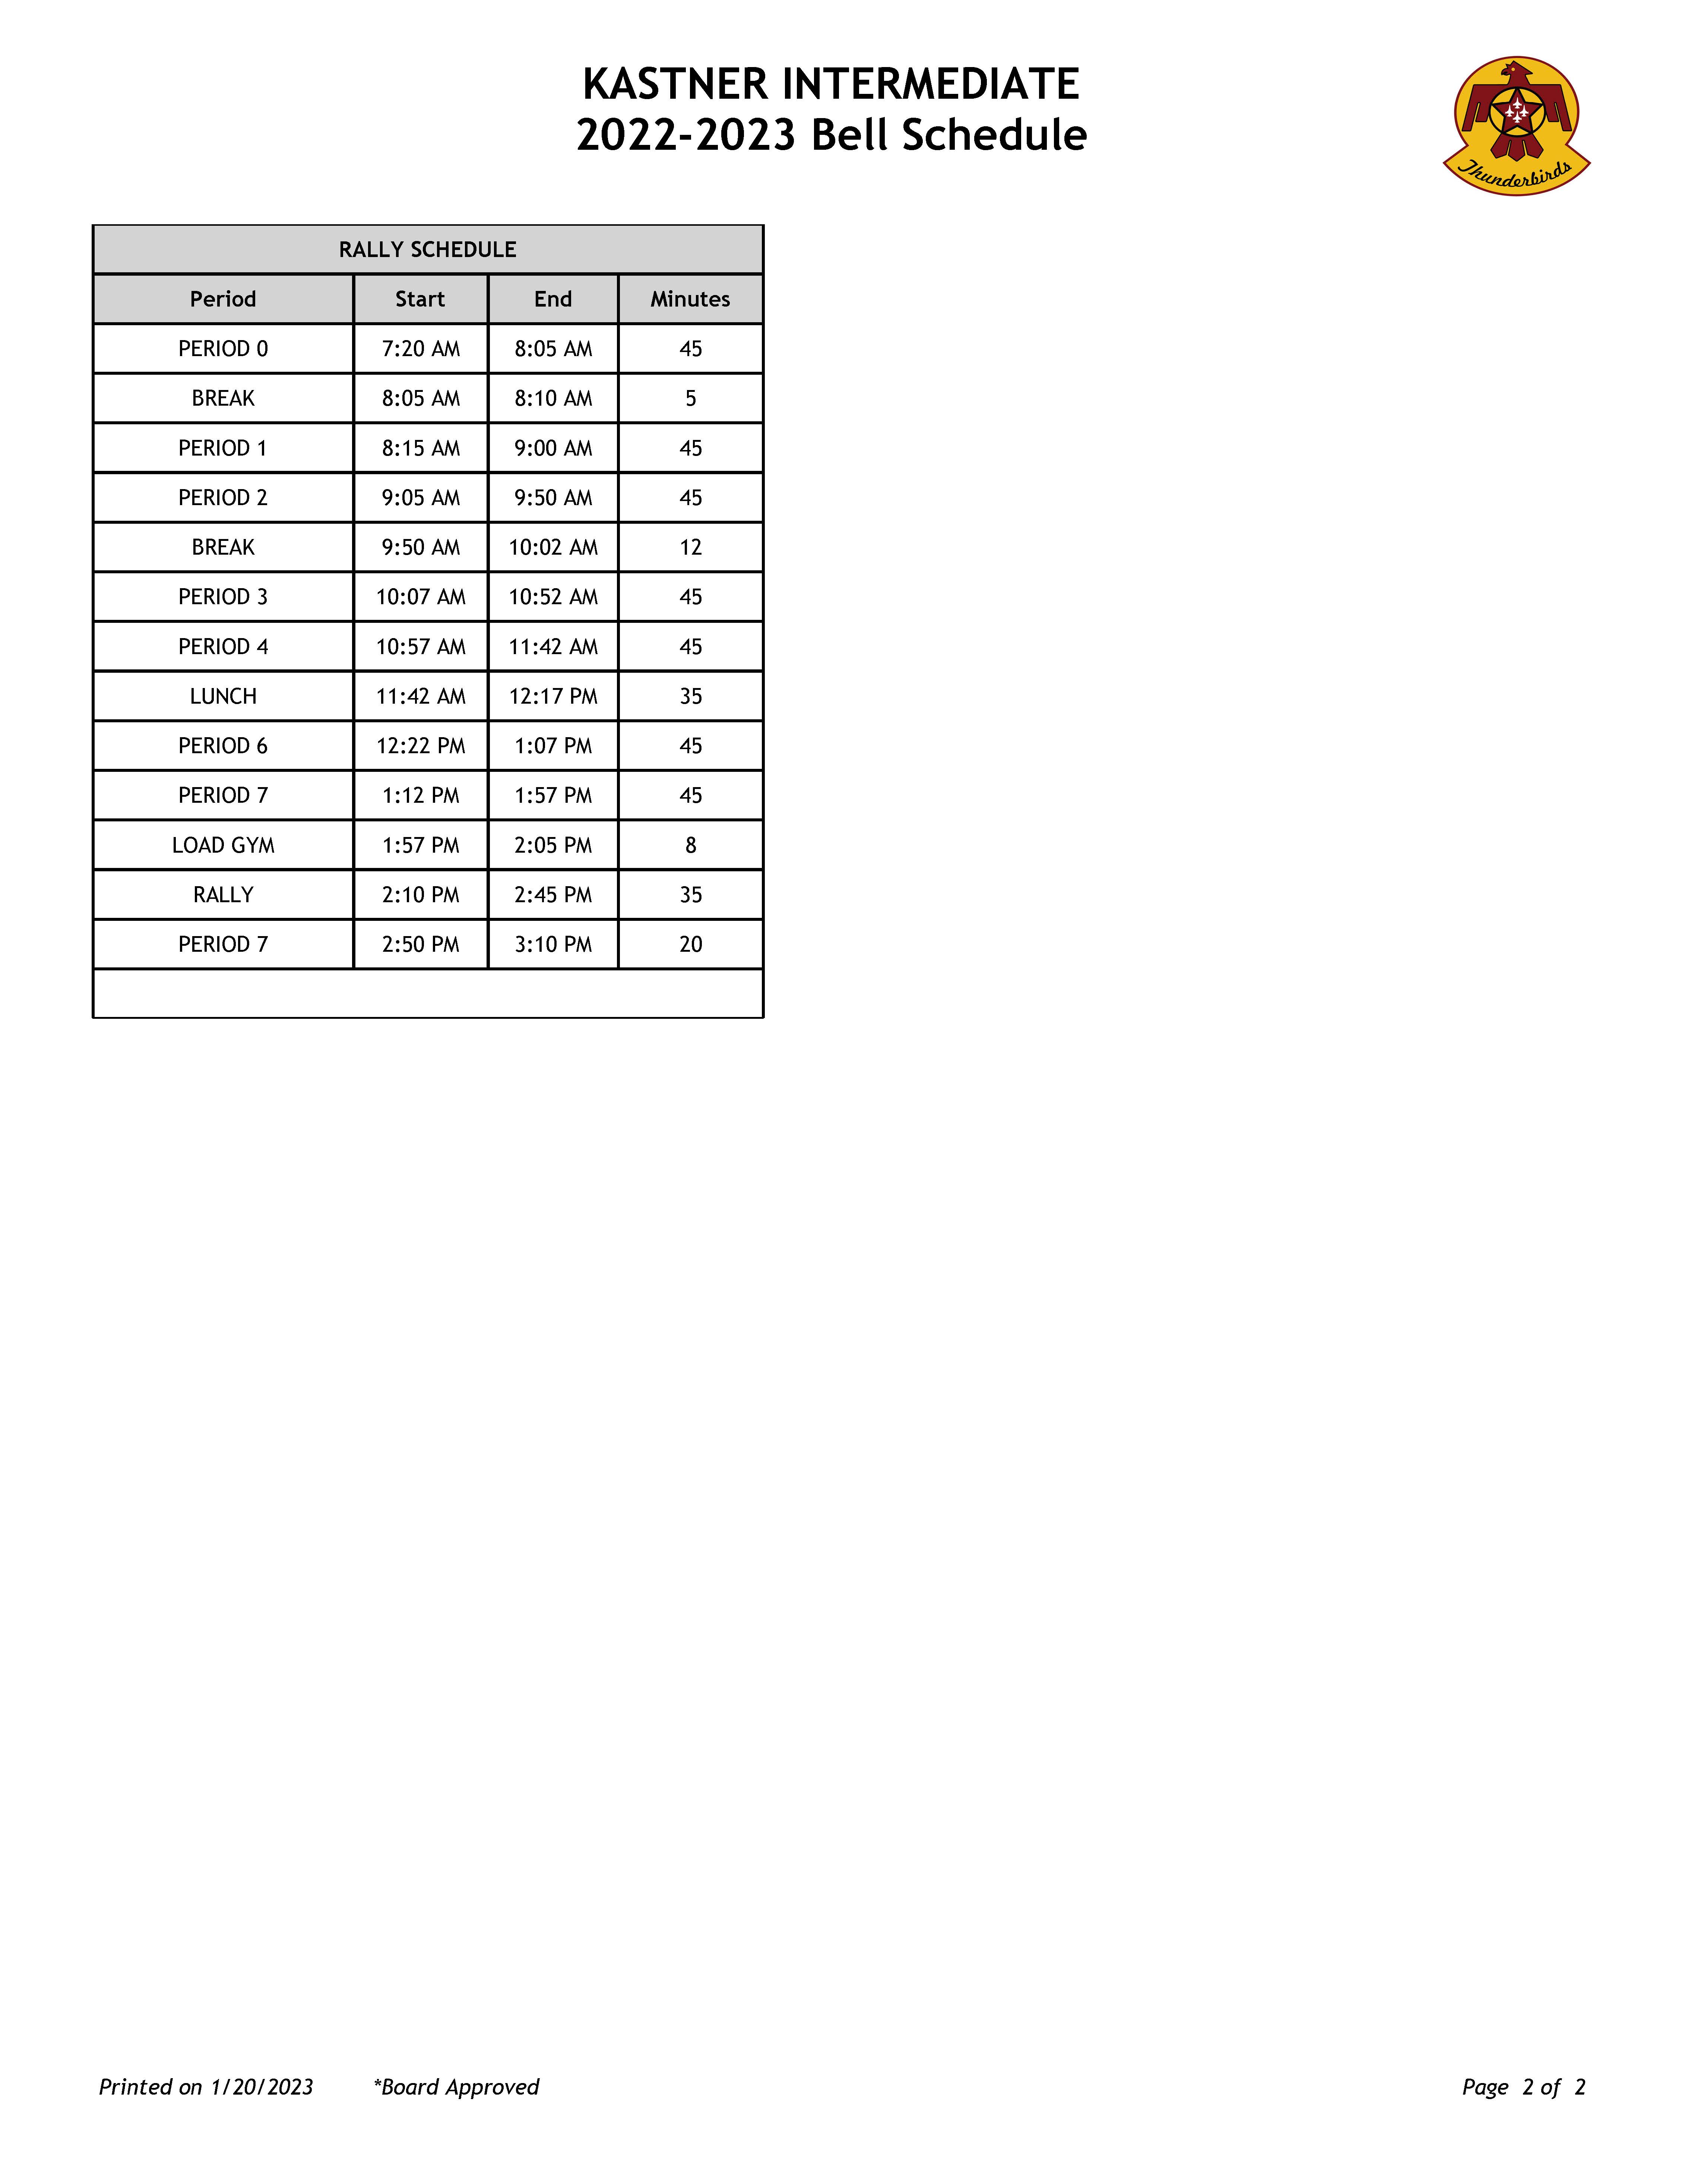 bell schedule 22-23 page 2